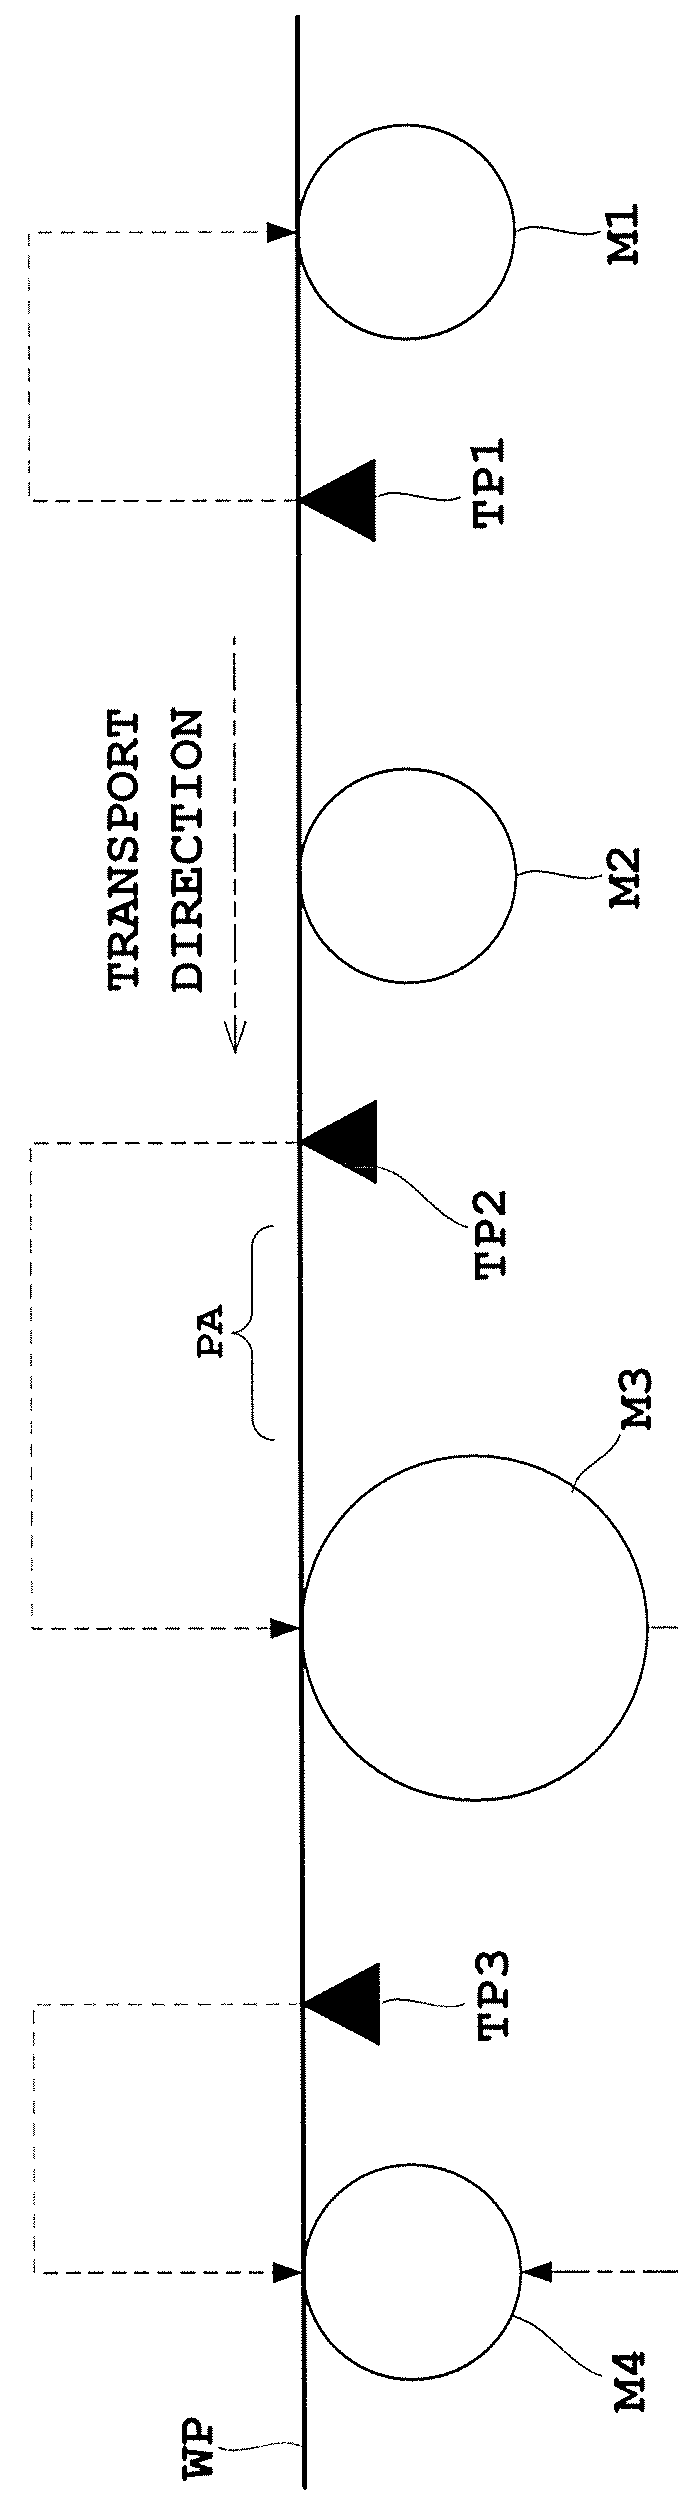 Transport control method, a transport apparatus, and a printing apparatus